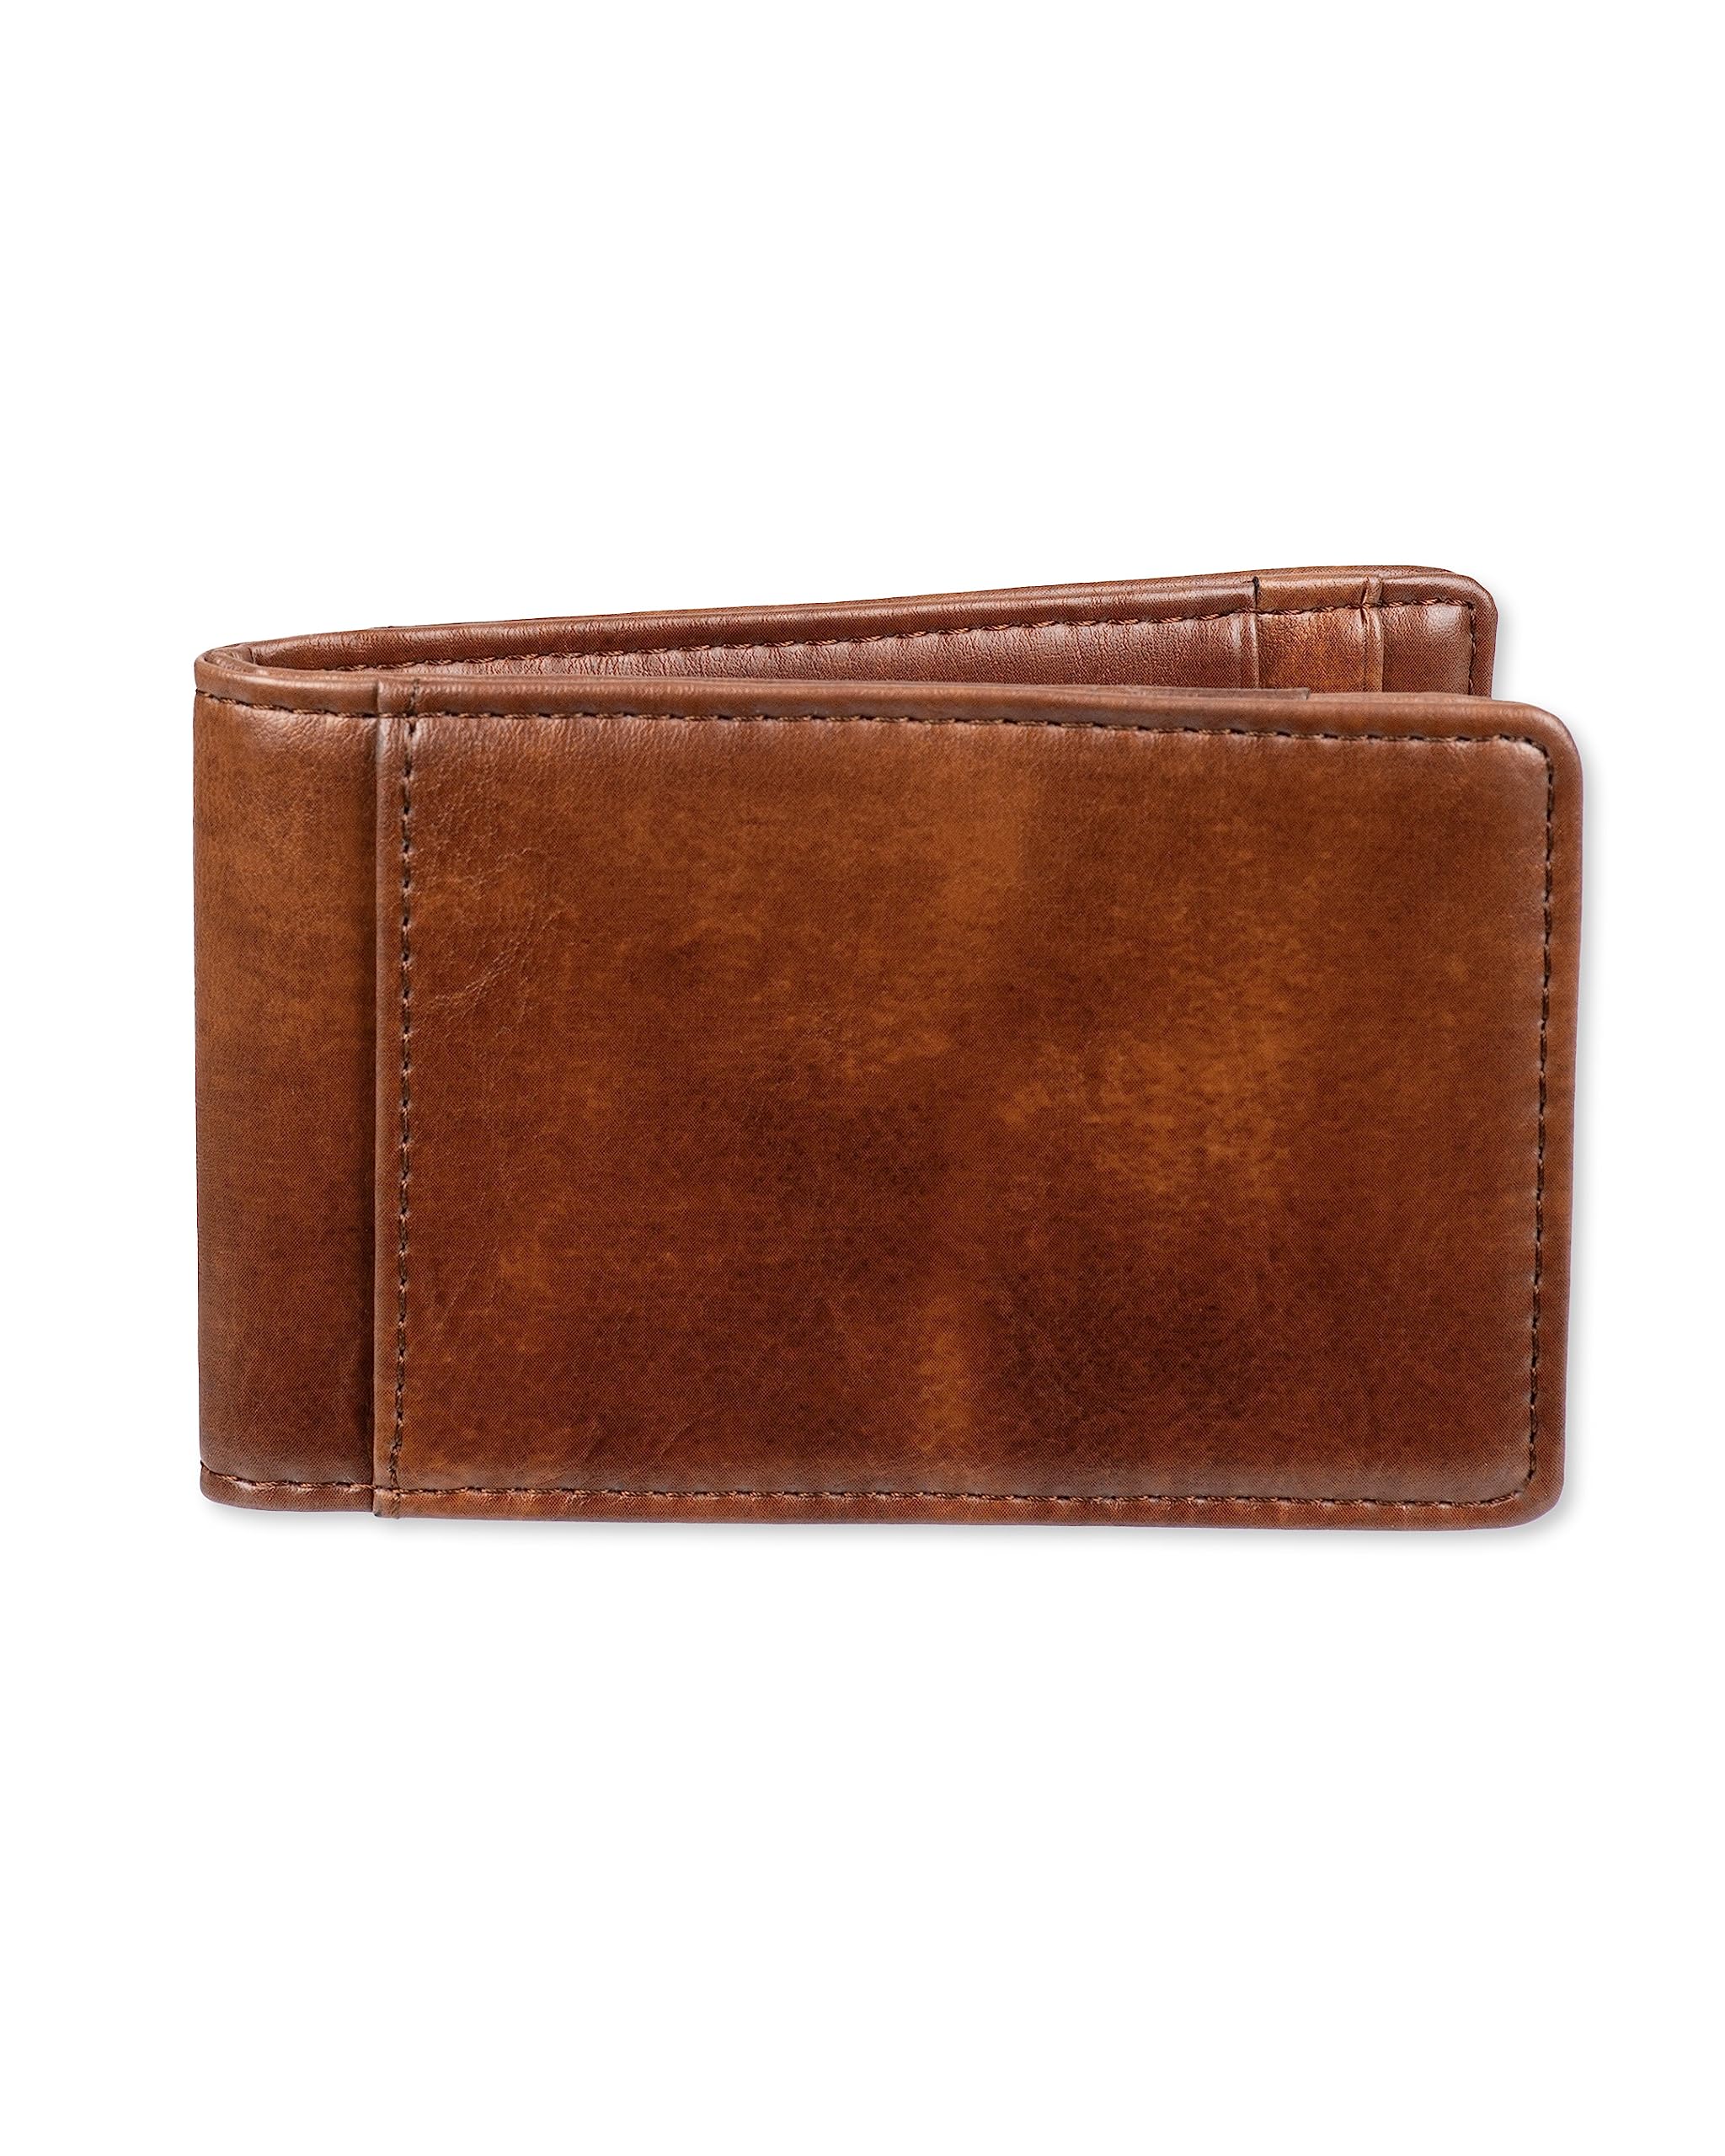 Amazon Essentials Men's Smart Wallet w/ Removable Money Clip (Brown) $8.10 + Free Shipping w/ Prime or on $35+